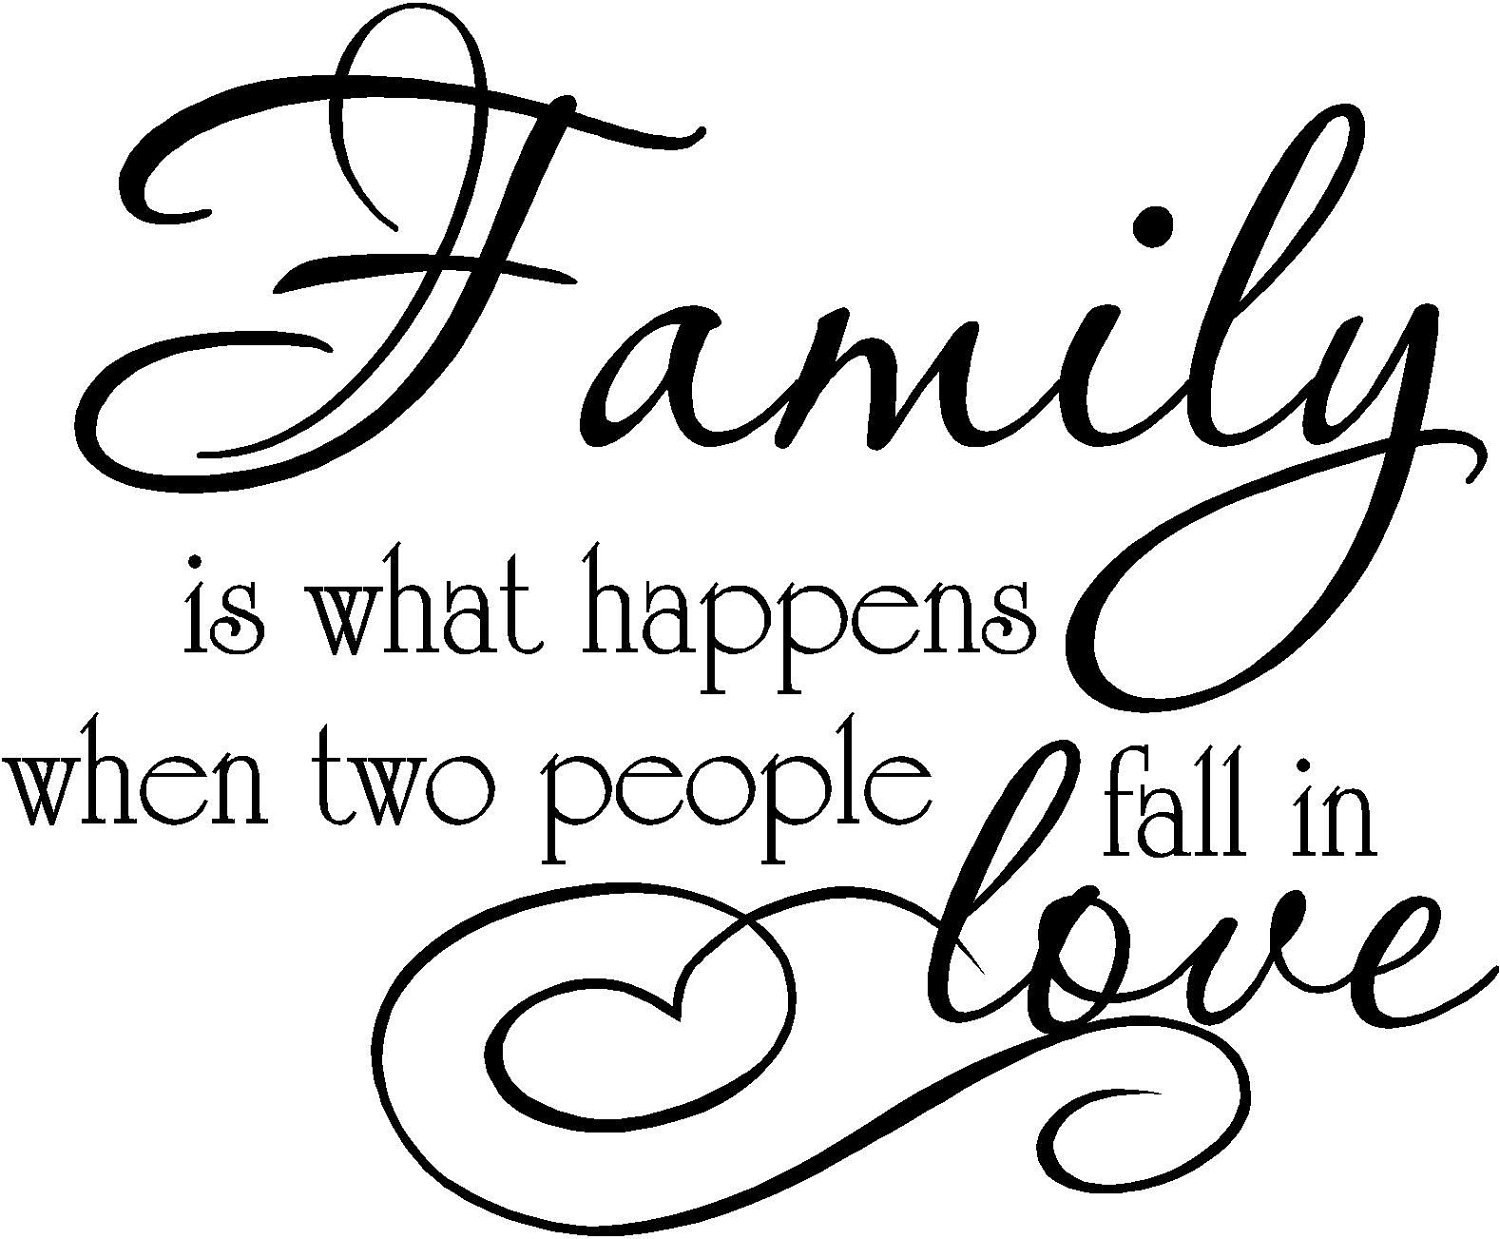 Little Family Quotes
 Family is what happens when two people fall in love nyl